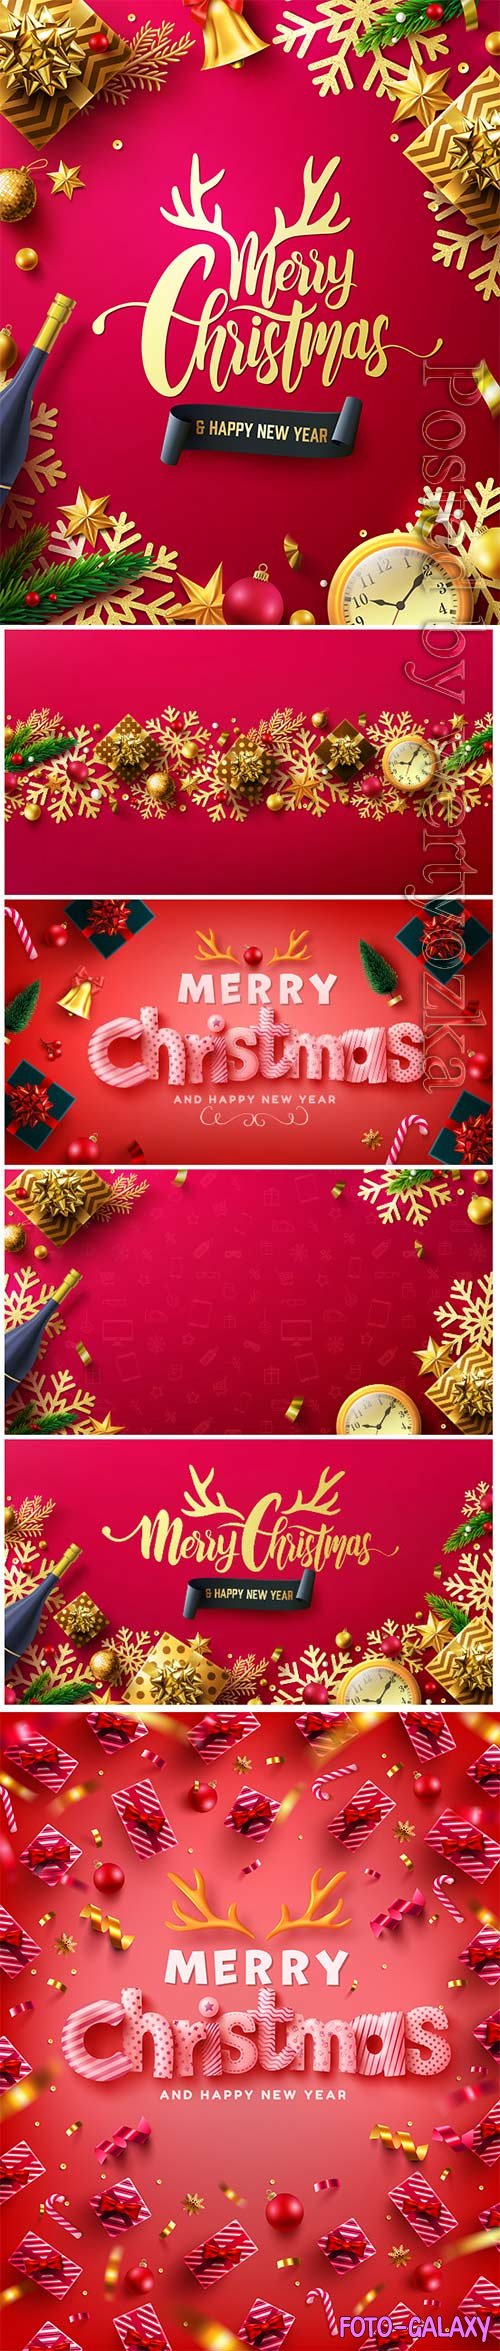 Vector of merry christmas & happy new year promotion poster or banner 